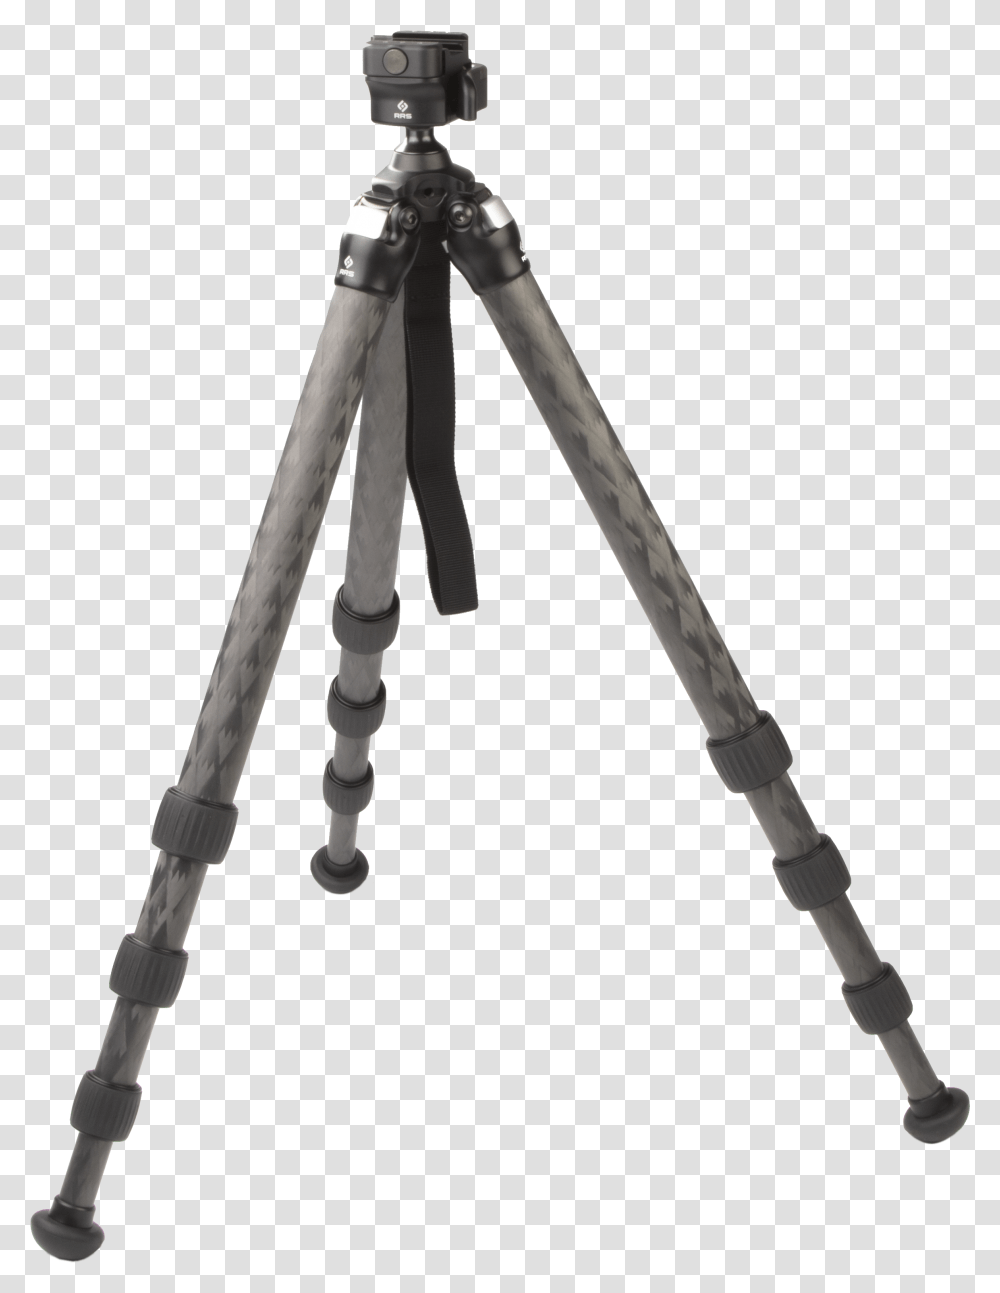 Manfrotto Tripod, Bow, Sword, Blade, Weapon Transparent Png